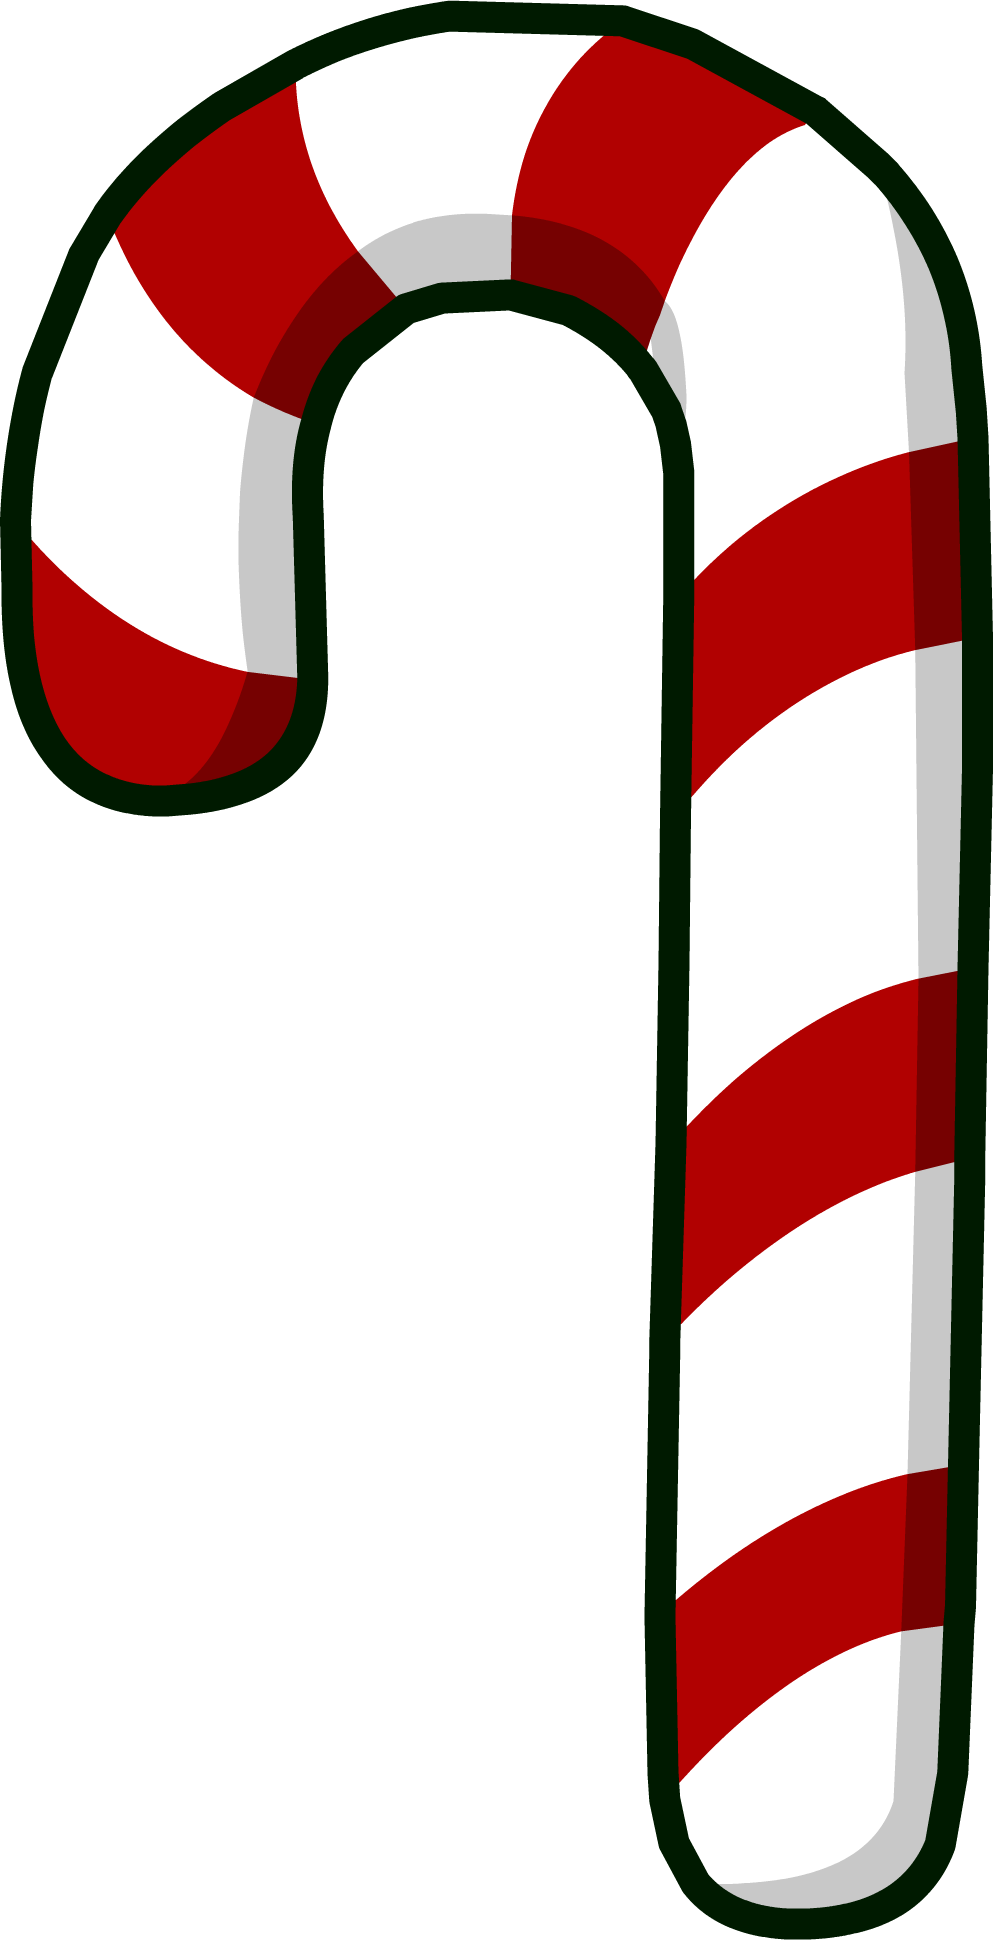 Candy Cane Images - Cartoon Candy Cane Png (1231x2411)